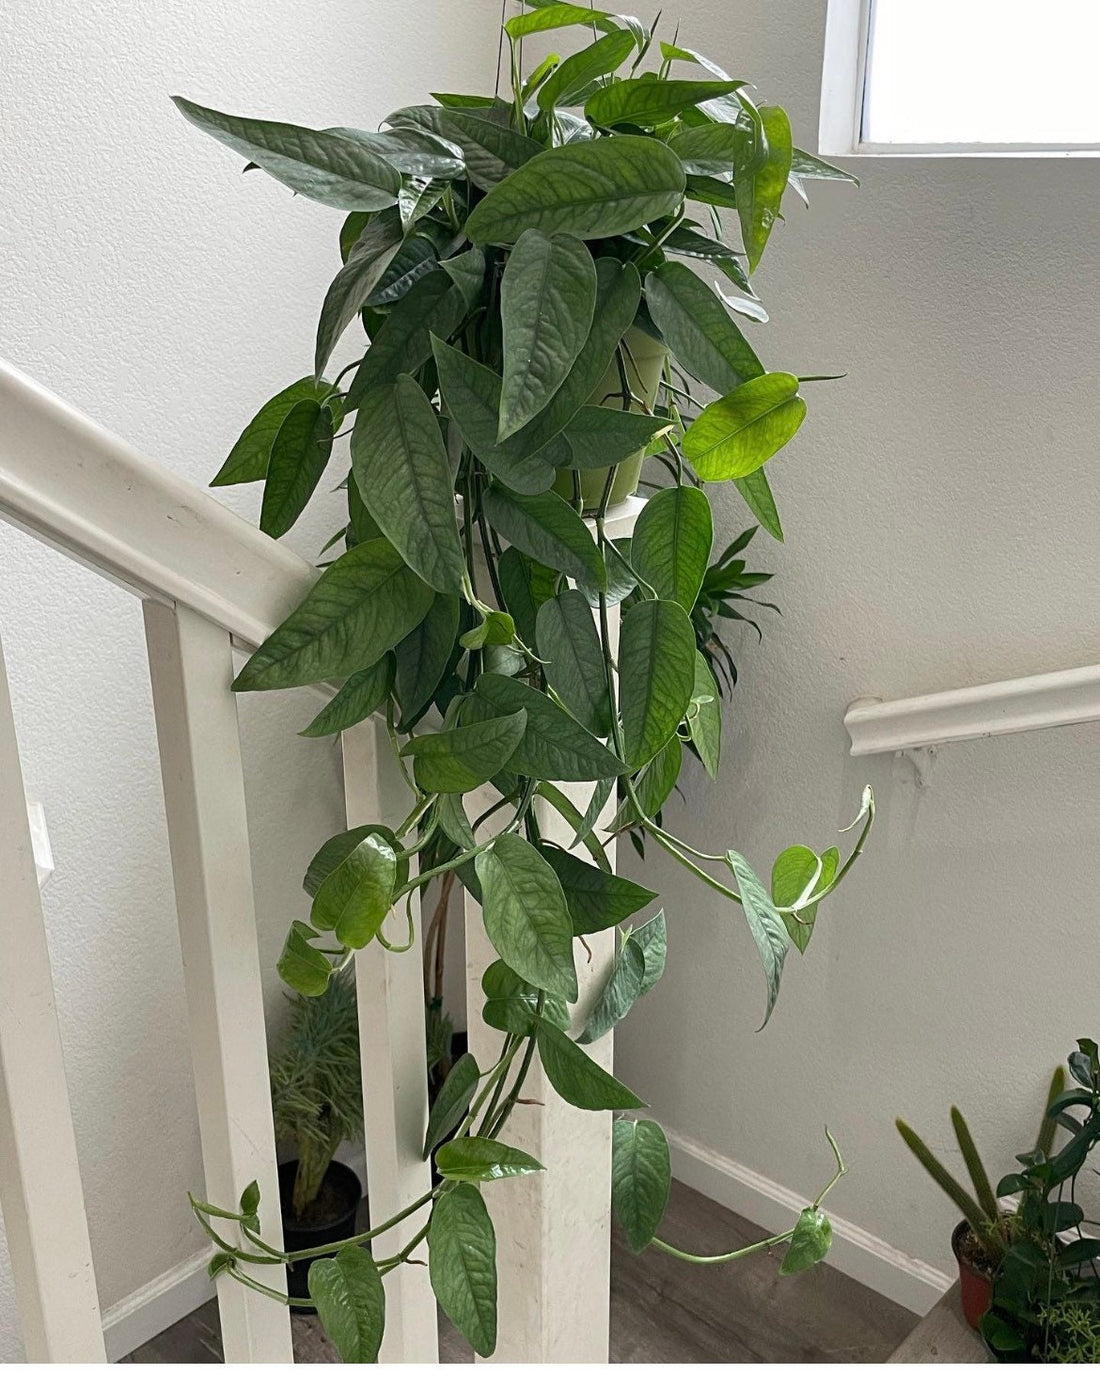 XL  1-2ft Trailing Cebu Blue pothos in  6 inch growers pot-not exact plant-similar to photos -hard to find this size 3 available as of 1/27